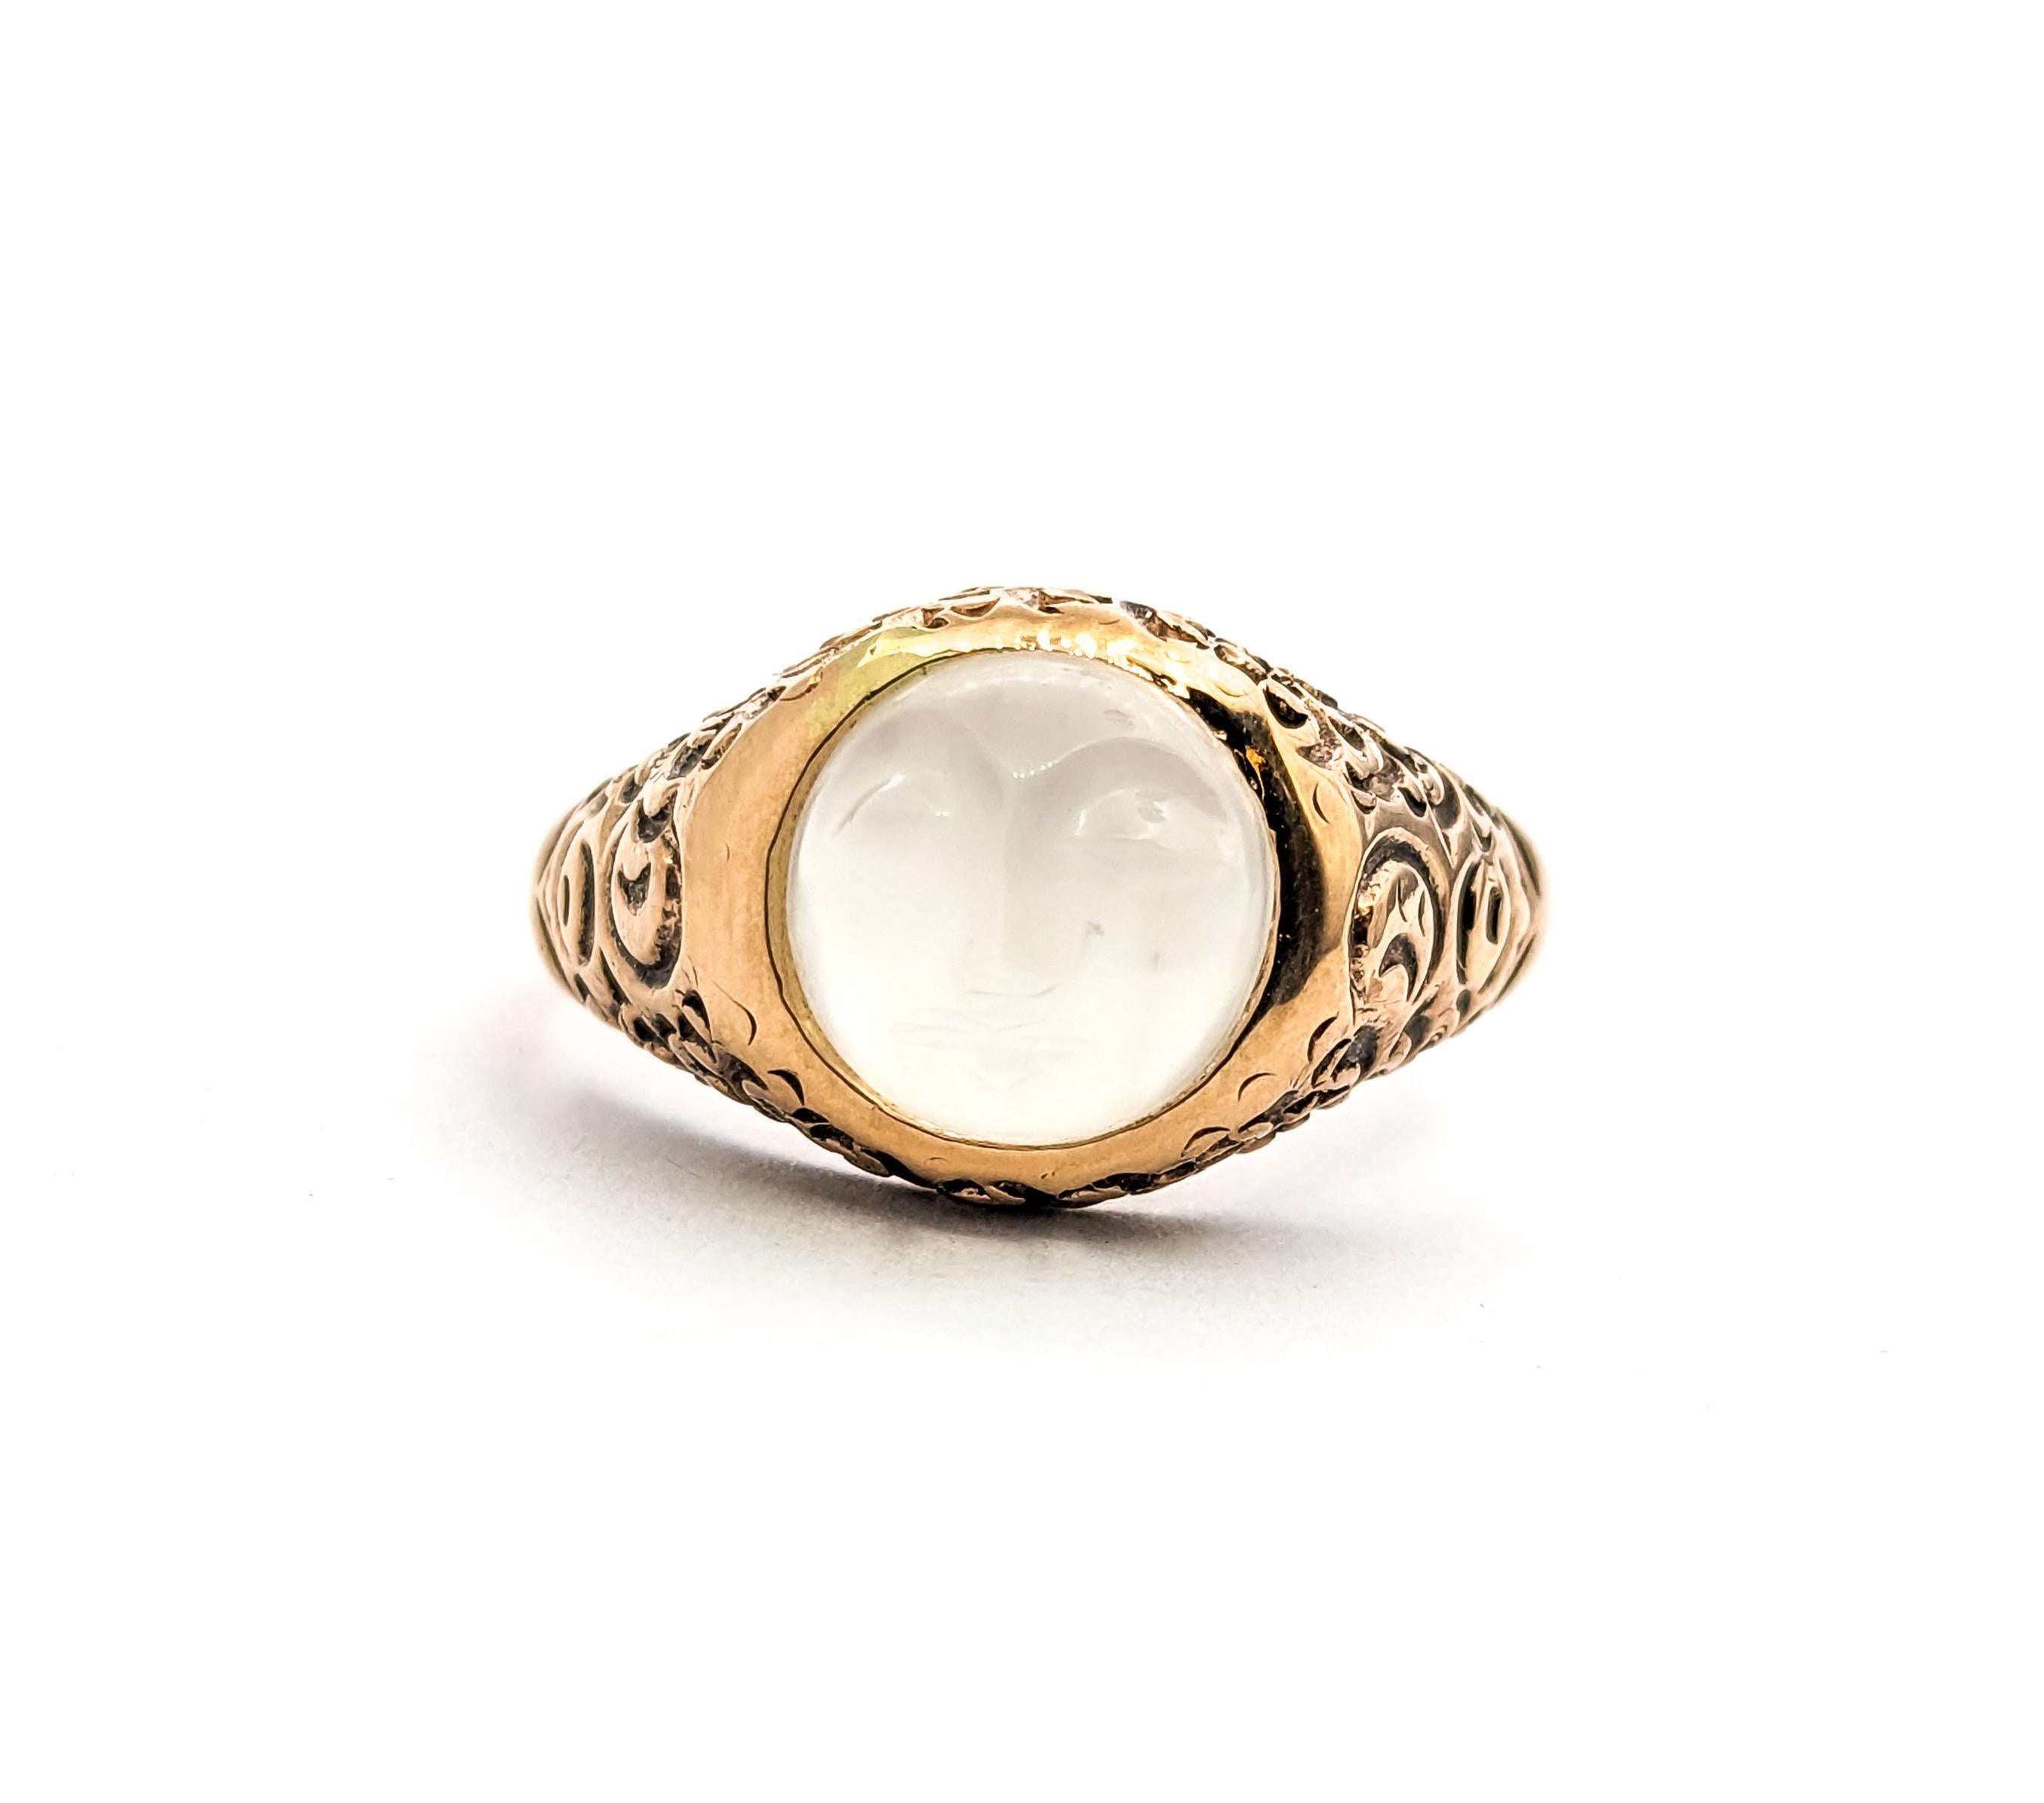 9mm Cabochon Moonstone Ring In Yellow Gold

Introducing our exquisite antique moonstone ring, beautifully fashioned in 10k yellow gold. This ring features a stunning 9mm carved cabochon moonstone centerpiece, artfully carved to resemble a 